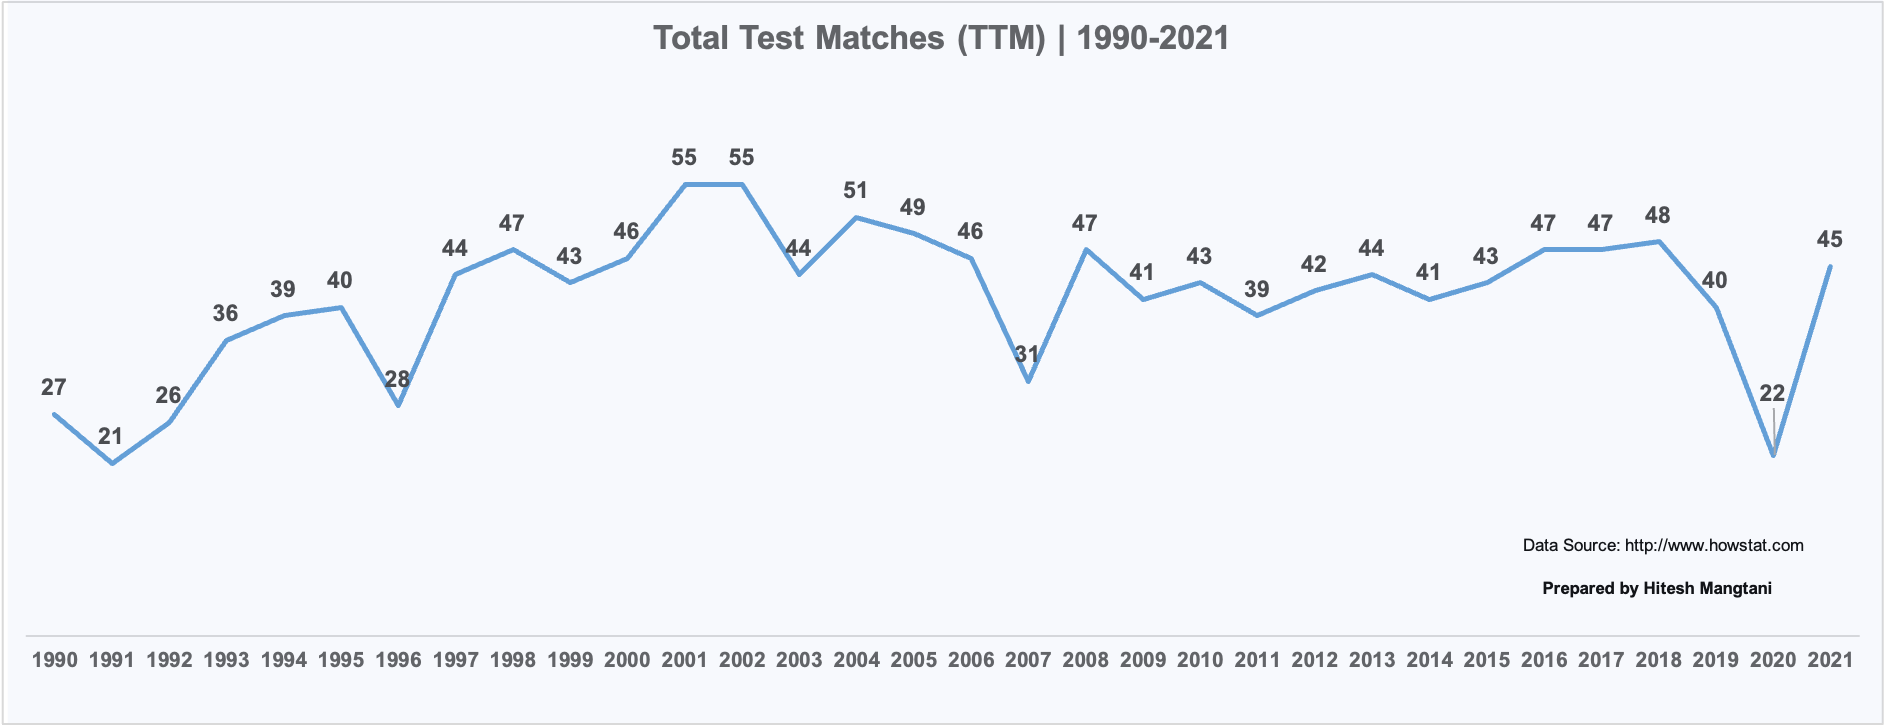 Cricket, Stats and Opinion: India tour of England in 2021 | Total Test Matches (TTM) 1990-2021 by Hitesh Mangtani